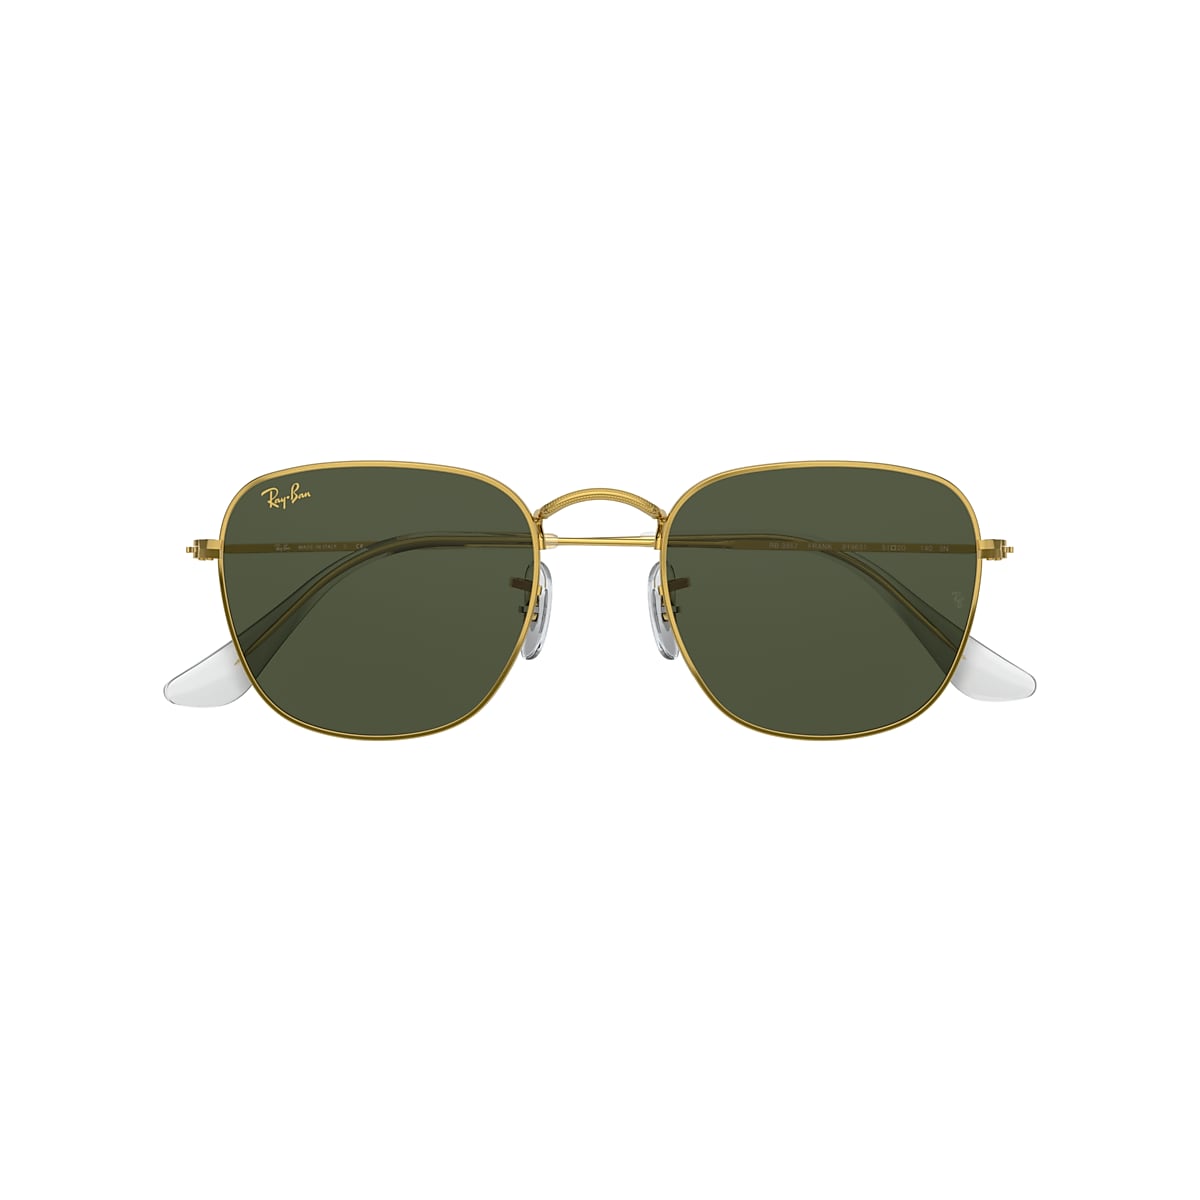 Ray-Ban® Sunglasses Official US Store: up to 50% Off on Select Styles